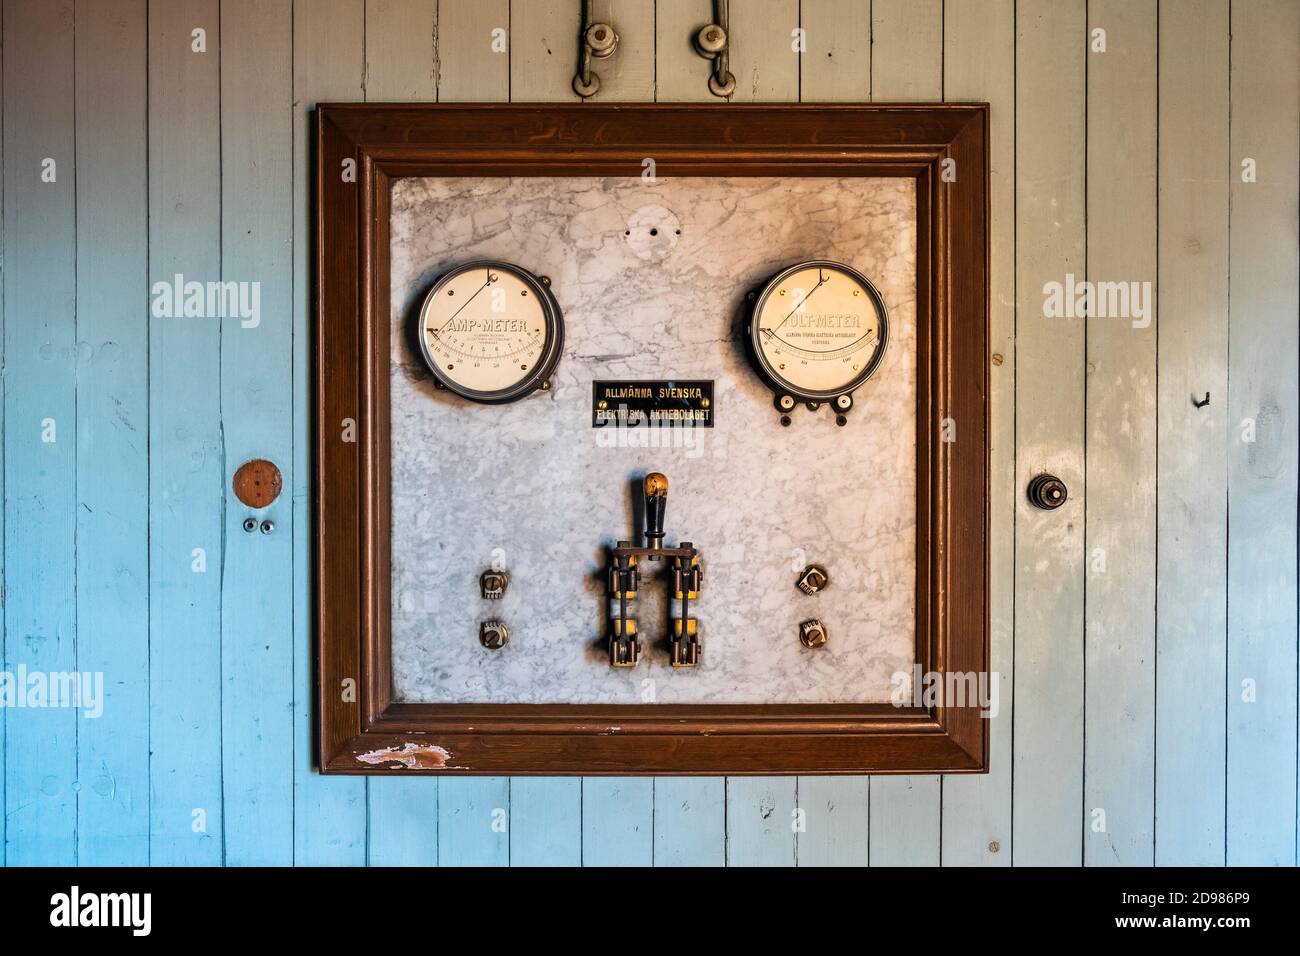 Old electrical indicating instrument on a marble panel Stock Photo